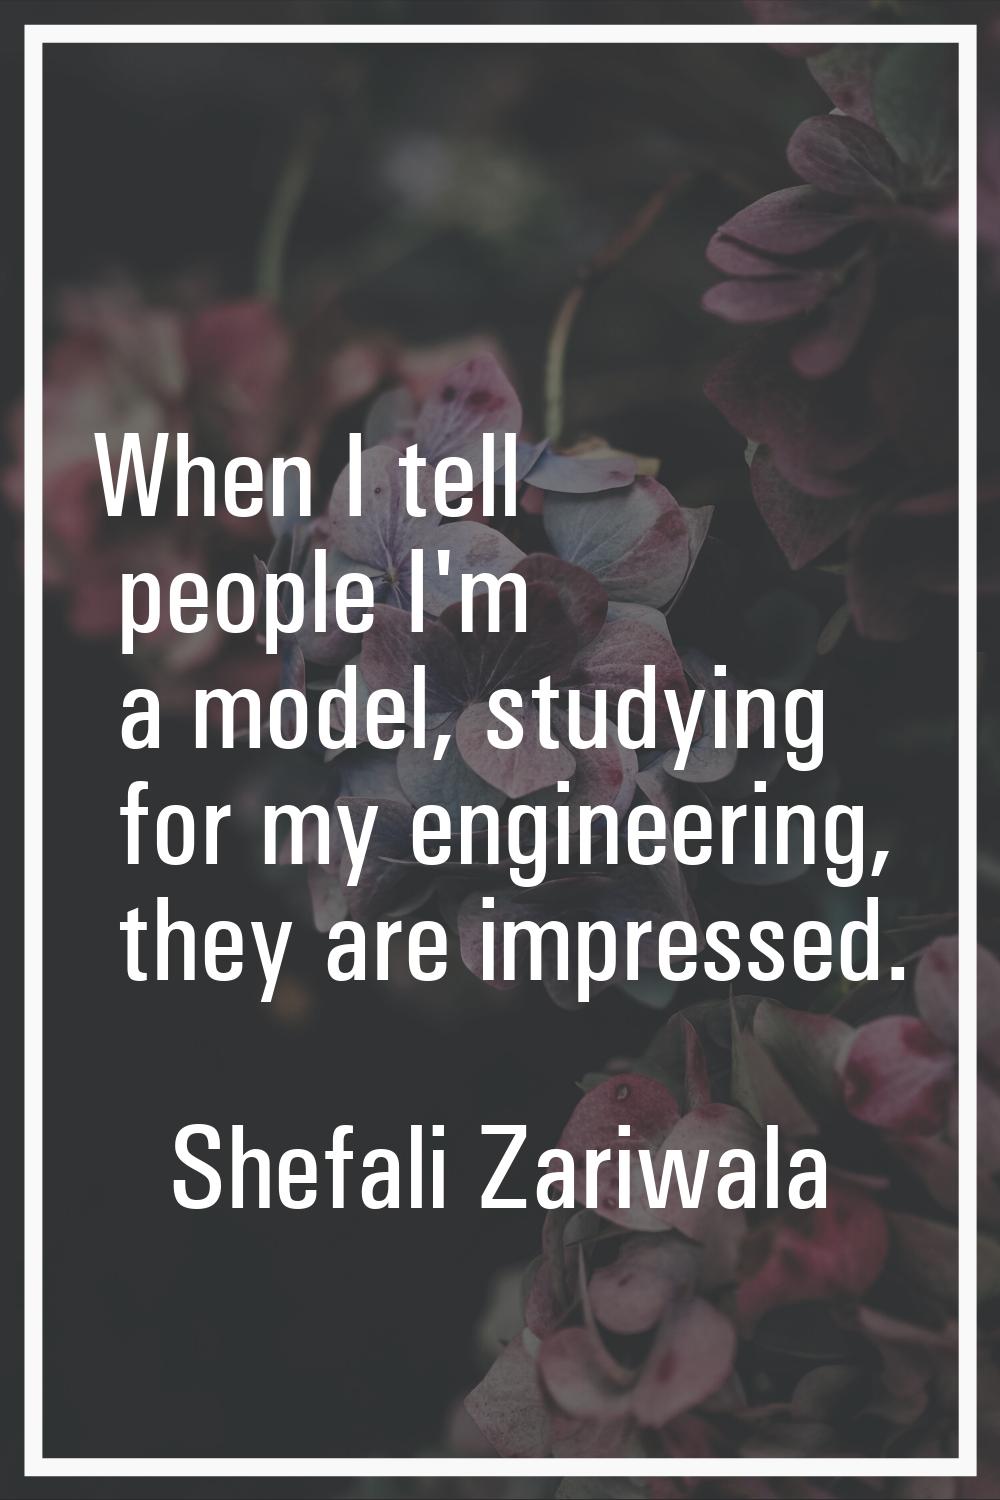 When I tell people I'm a model, studying for my engineering, they are impressed.